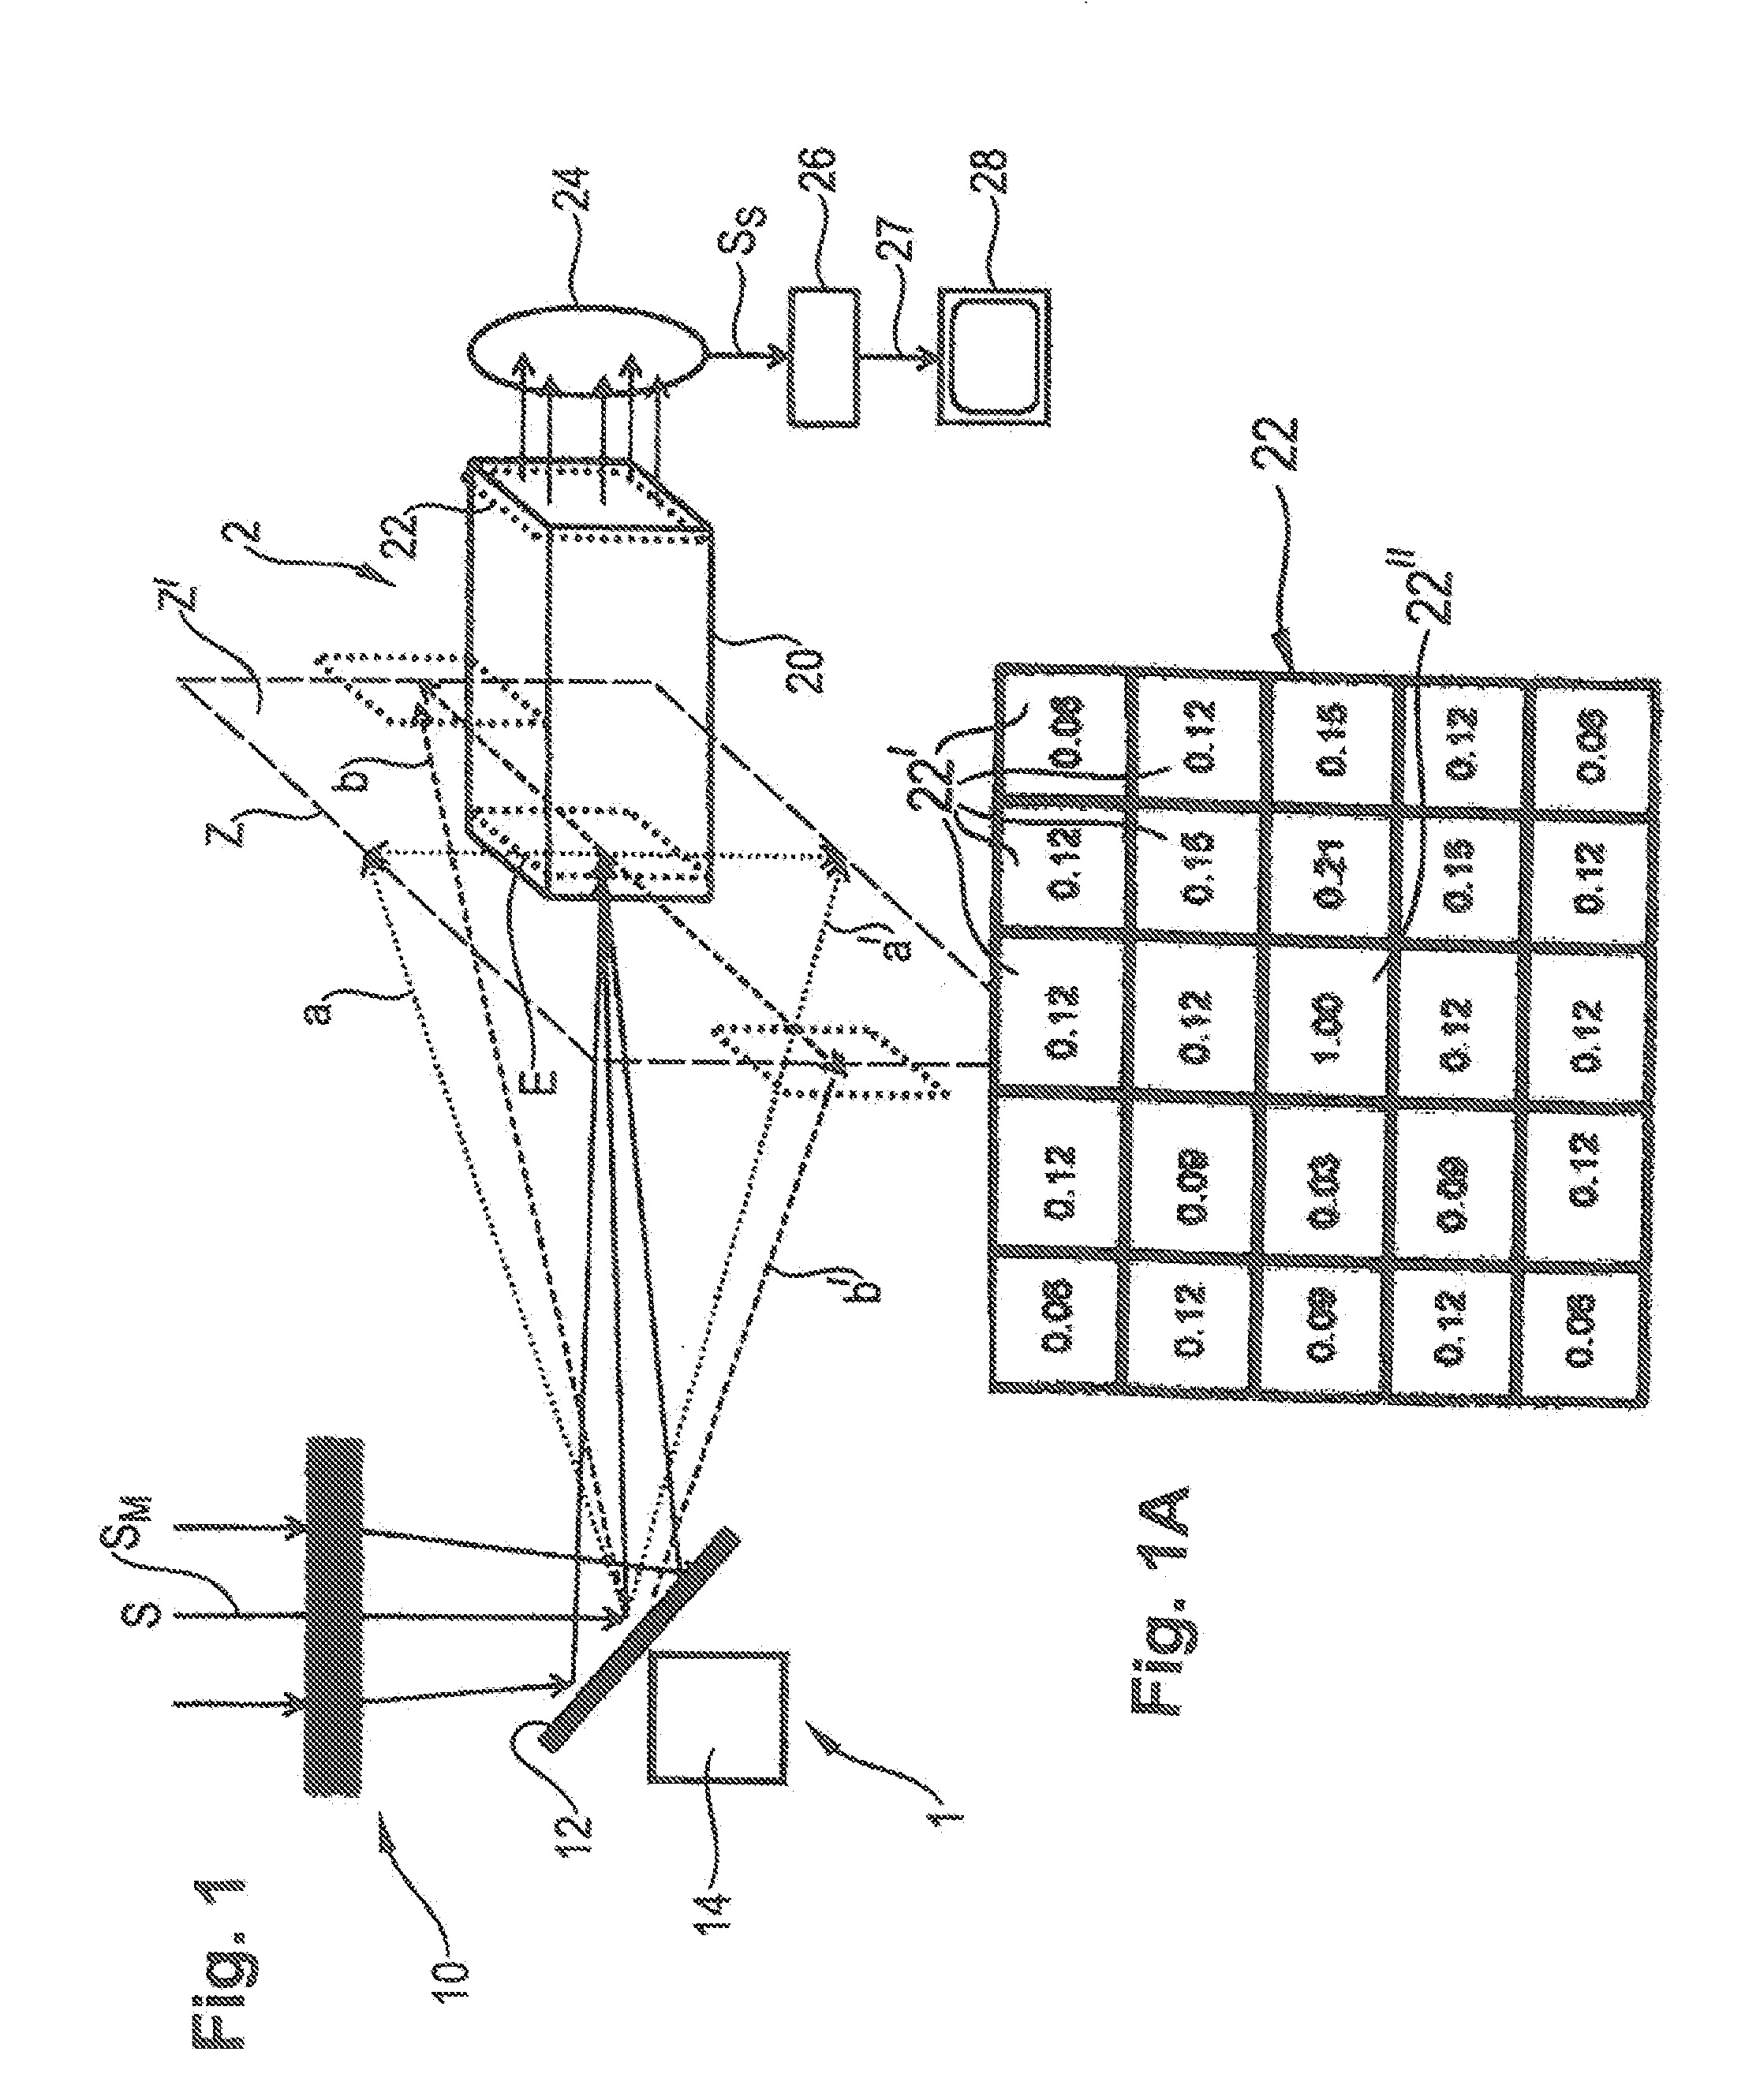 Method for Image Processing and Method that Can be Performed Therewith For the Automatic Detection of Objects, Observation Device and Method for High-Precision Tracking of the Course Followed by Launched Rockets over Large Distances